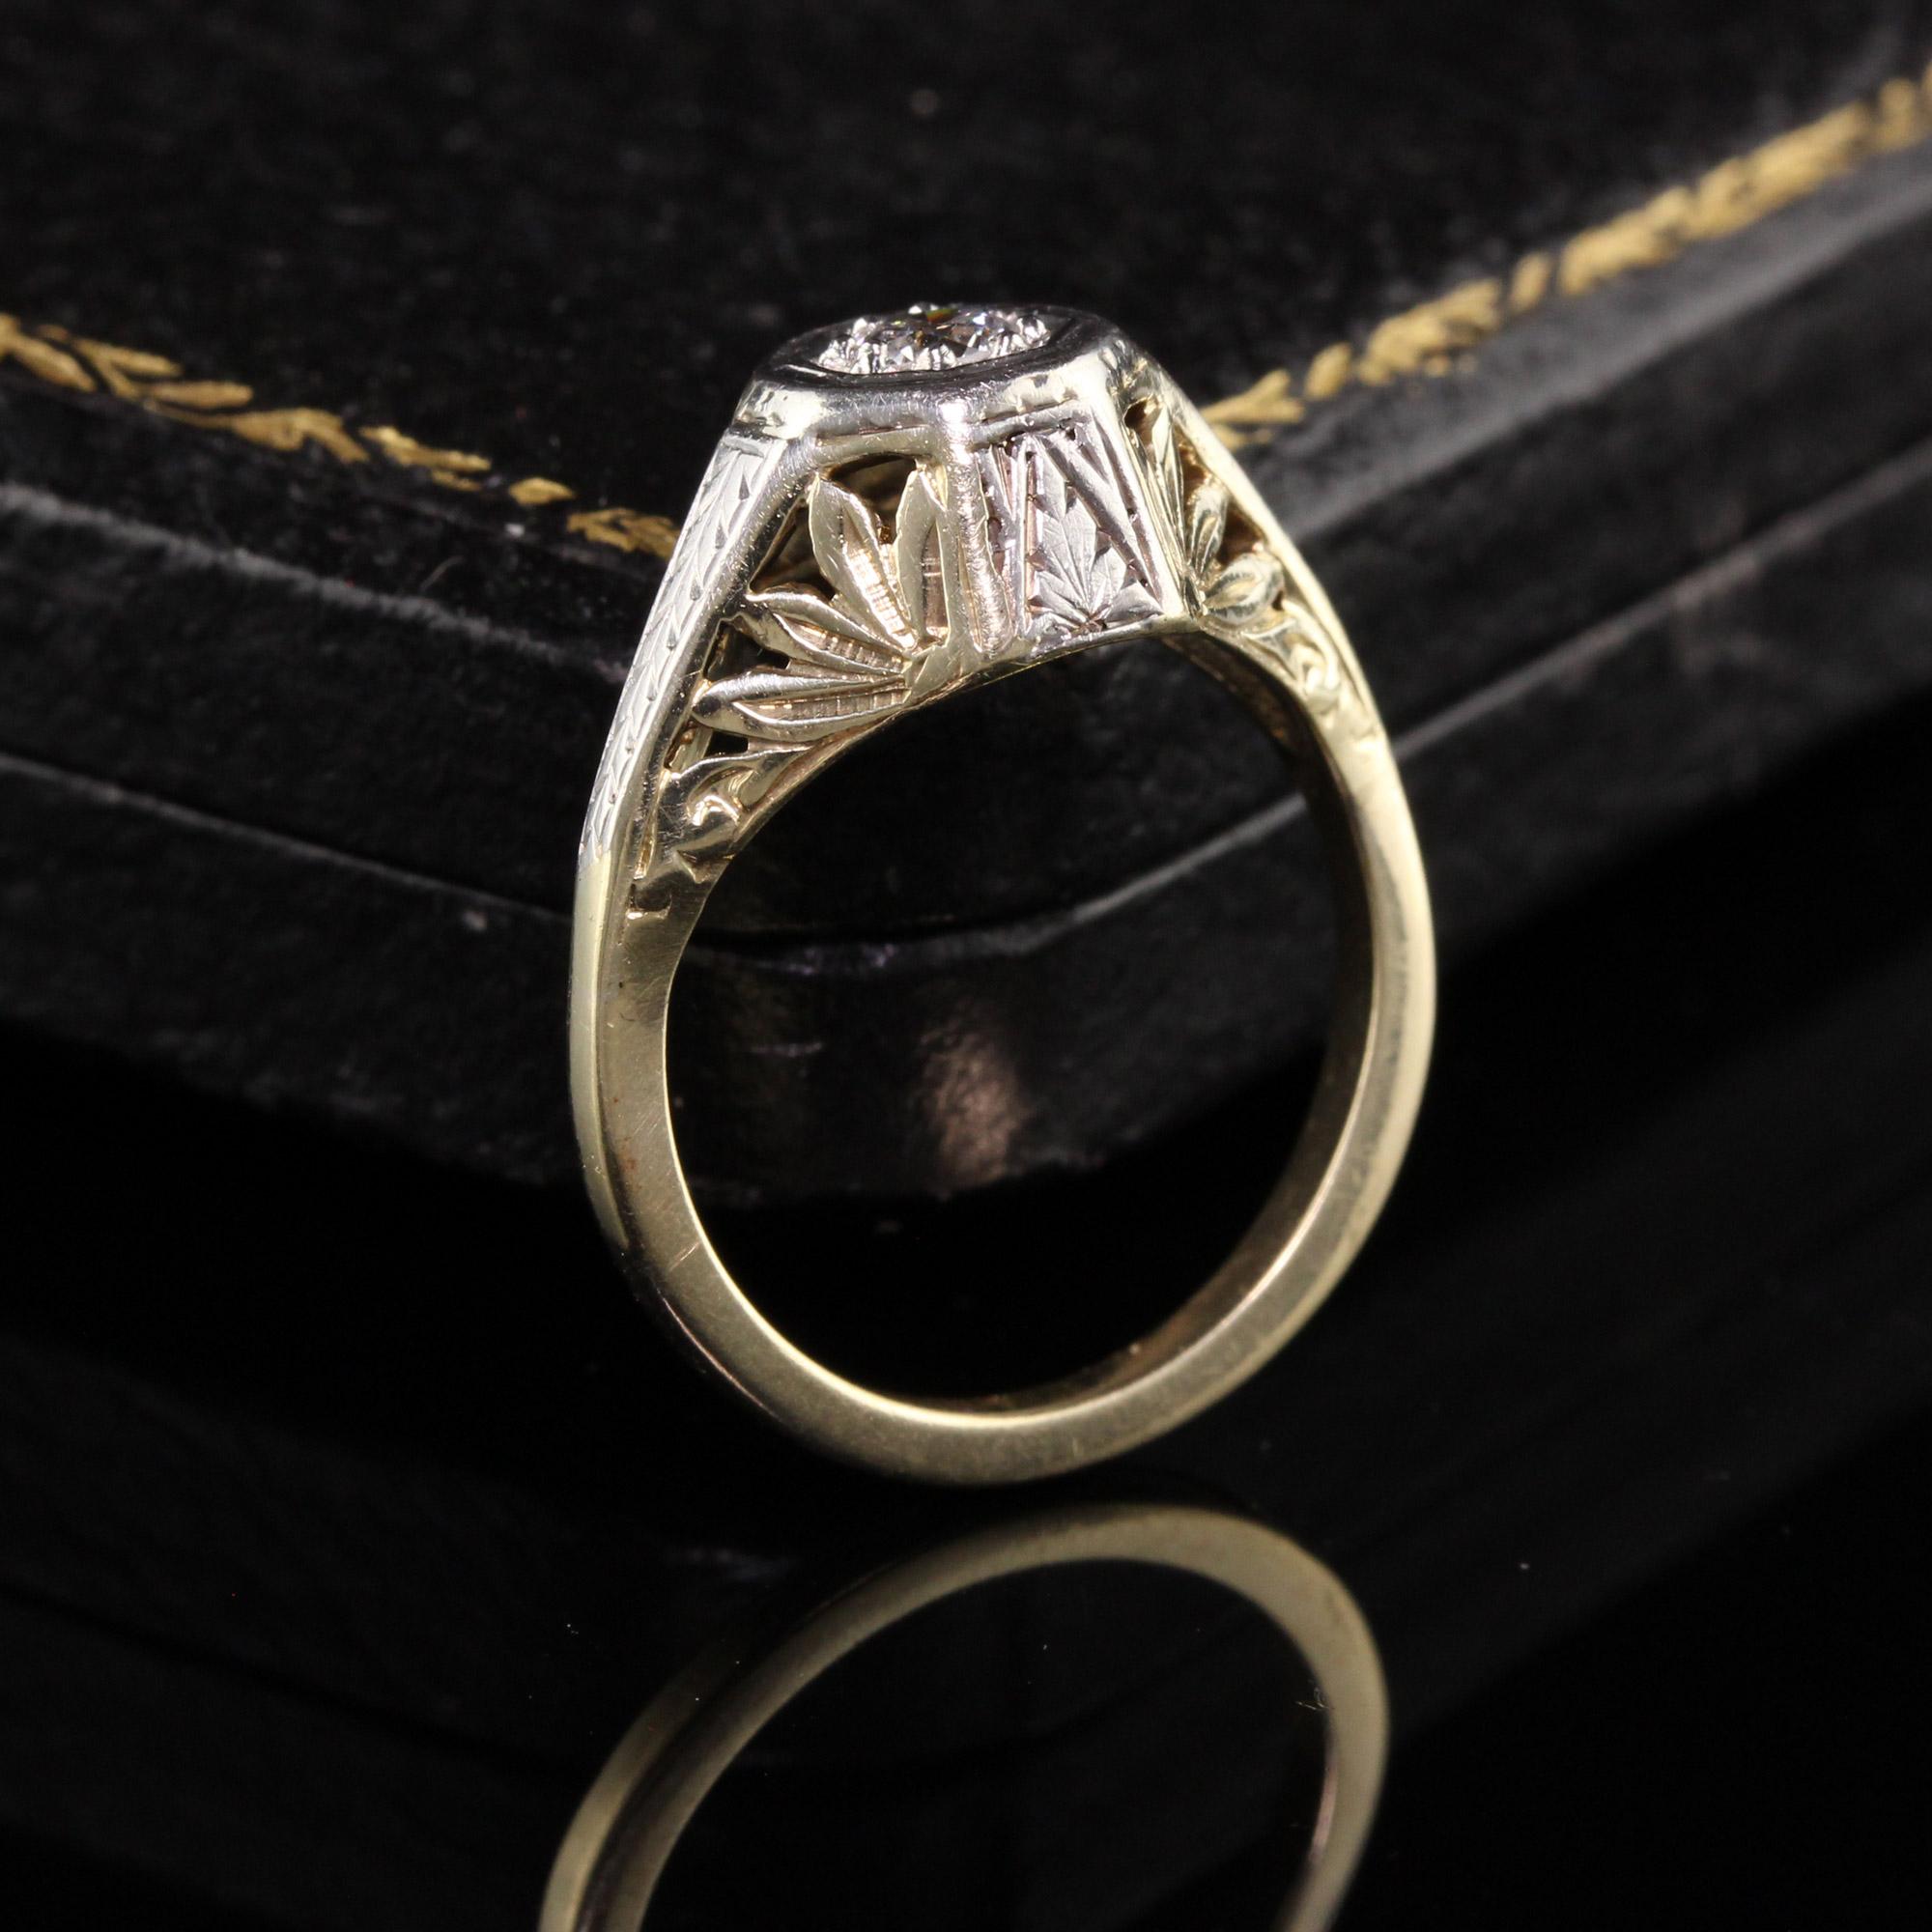 Beautiful Antique Art Deco 14K Yellow Gold Two Tone Old European Diamond Engagement Ring. This gorgeous ring has a old european diamond in the center of an amazing mounting with classic deep art deco engravings.

Item #R0889

Metal: 14K Yellow Gold